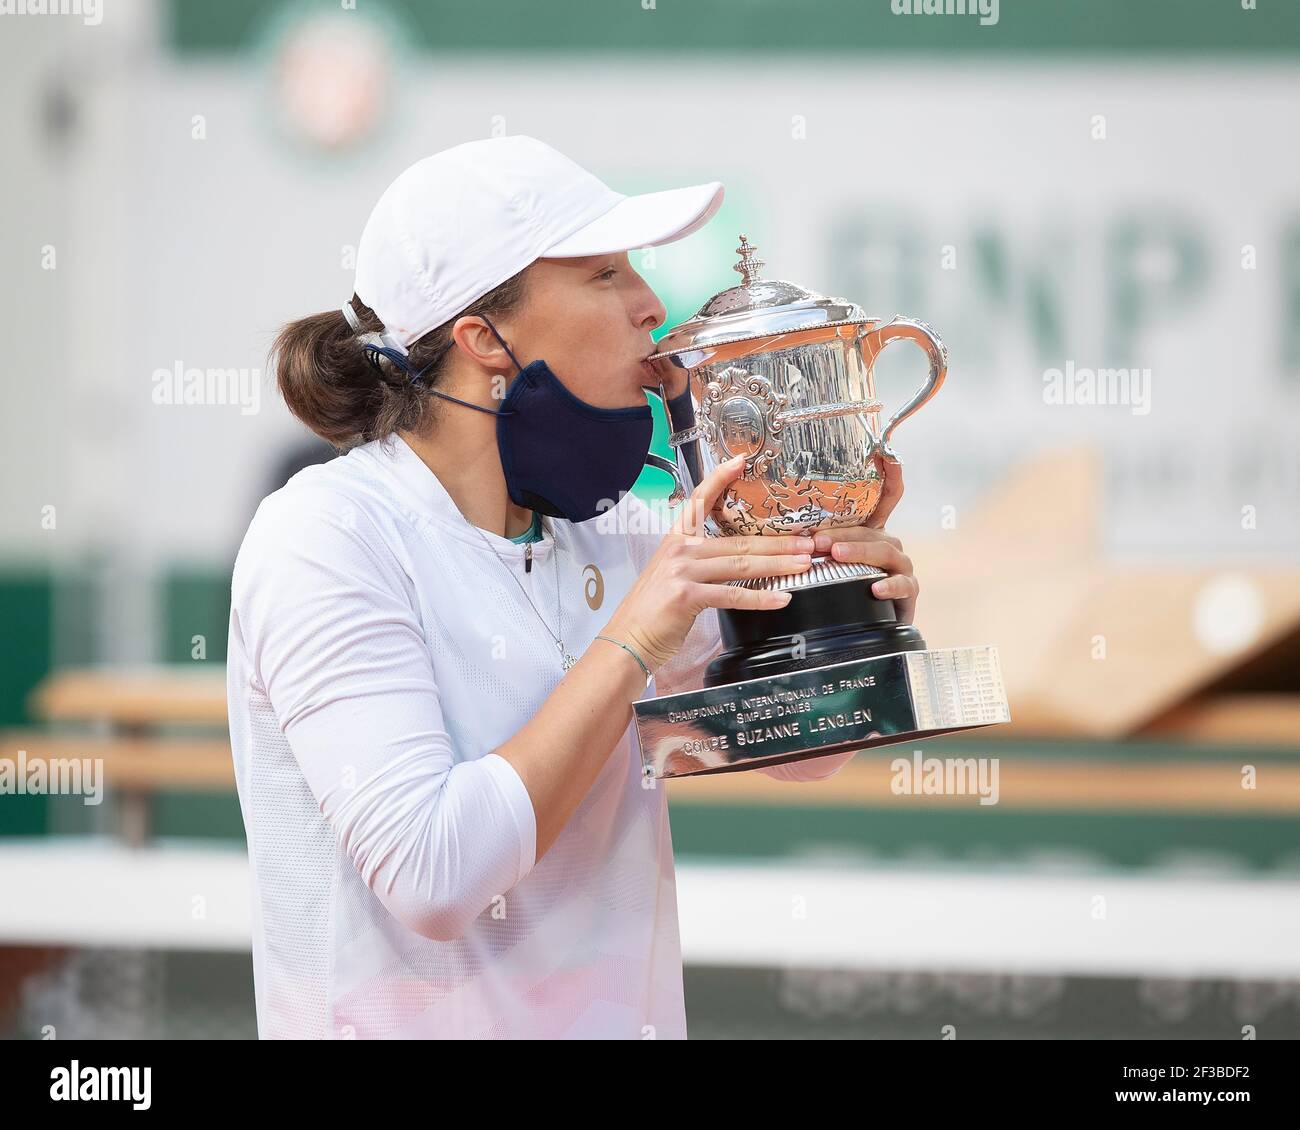 Polish tennis player Iga Swiatek kissing her trophy at the French Open 2020 tournament, Paris, France. Stock Photo